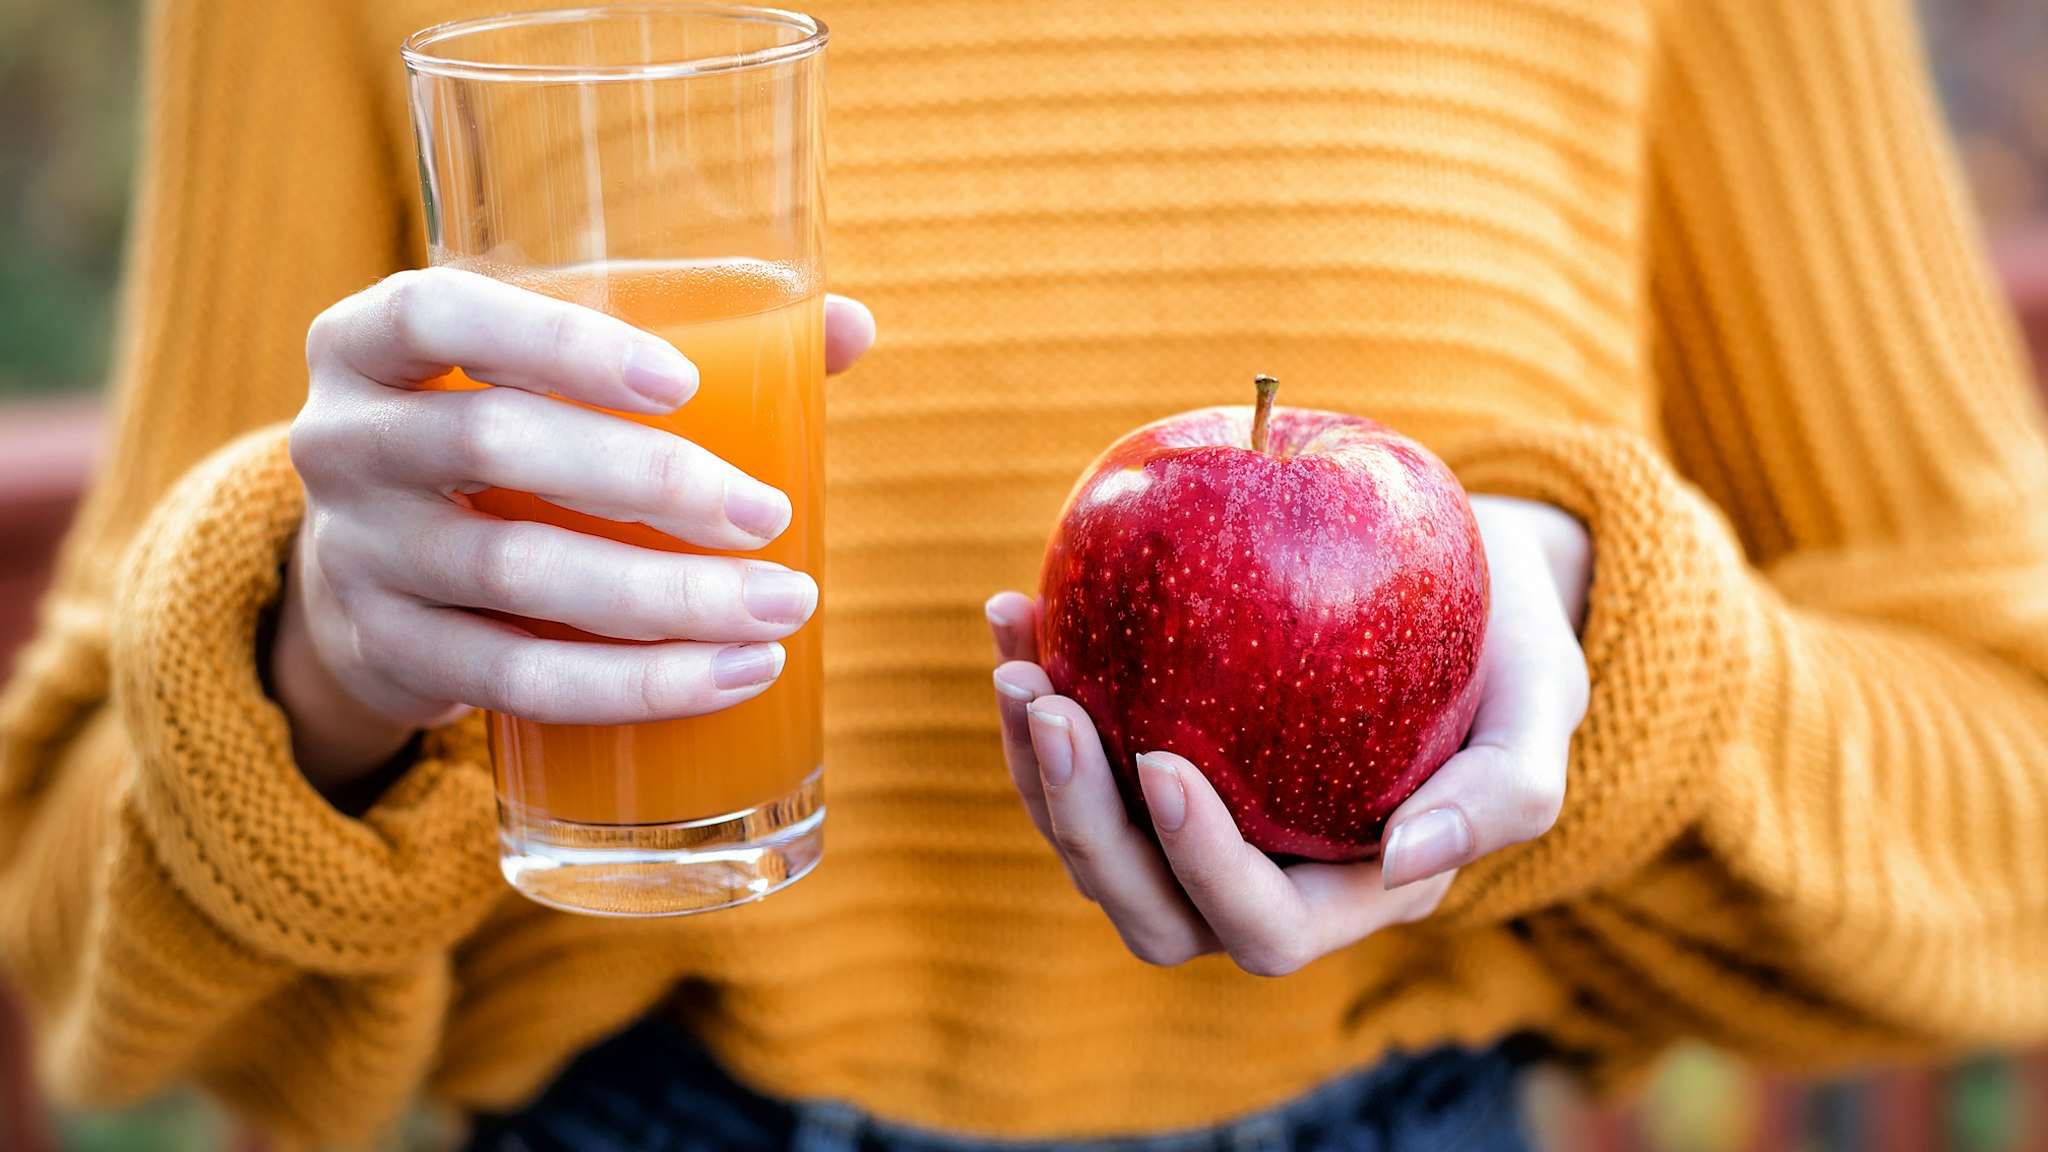 Young woman holding glass of apple juice and fresh apple - stock photo